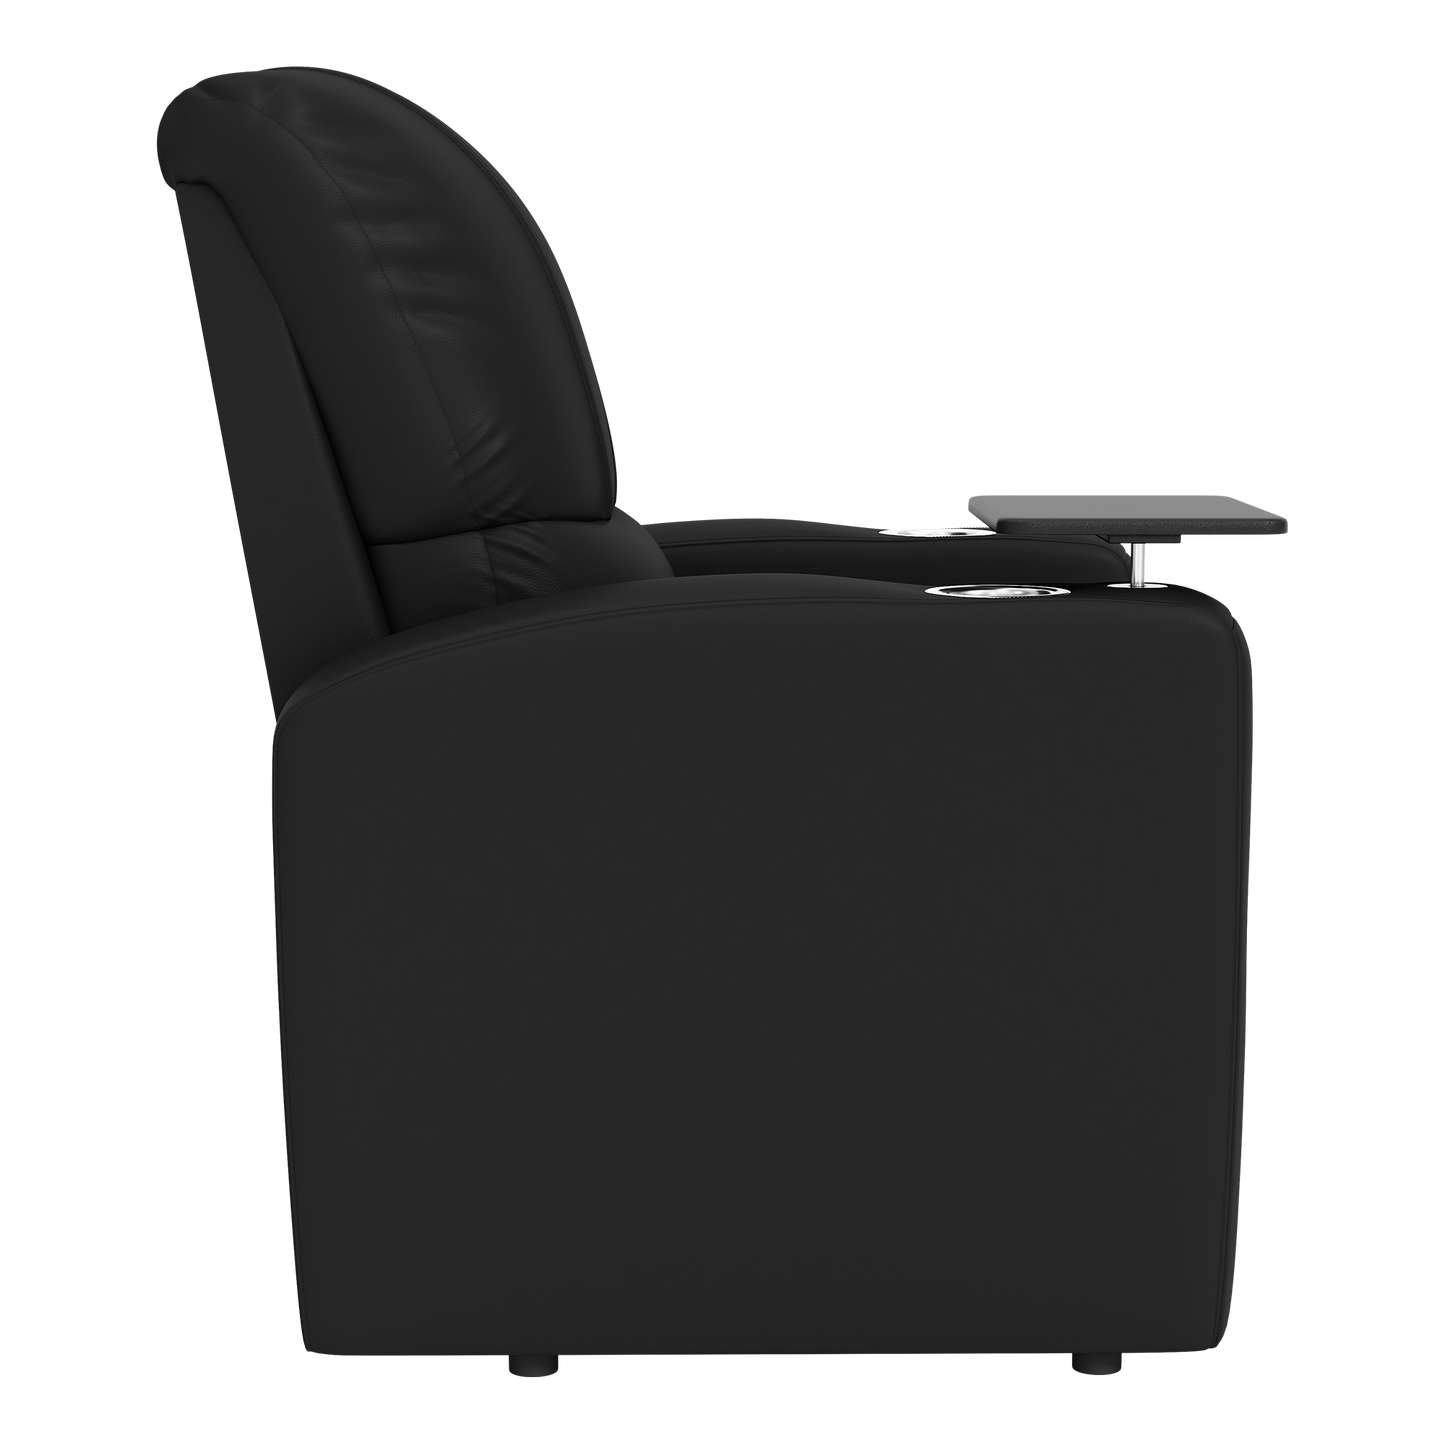 Stealth Power Plus Recliner with Nashville SC Secondary Logo